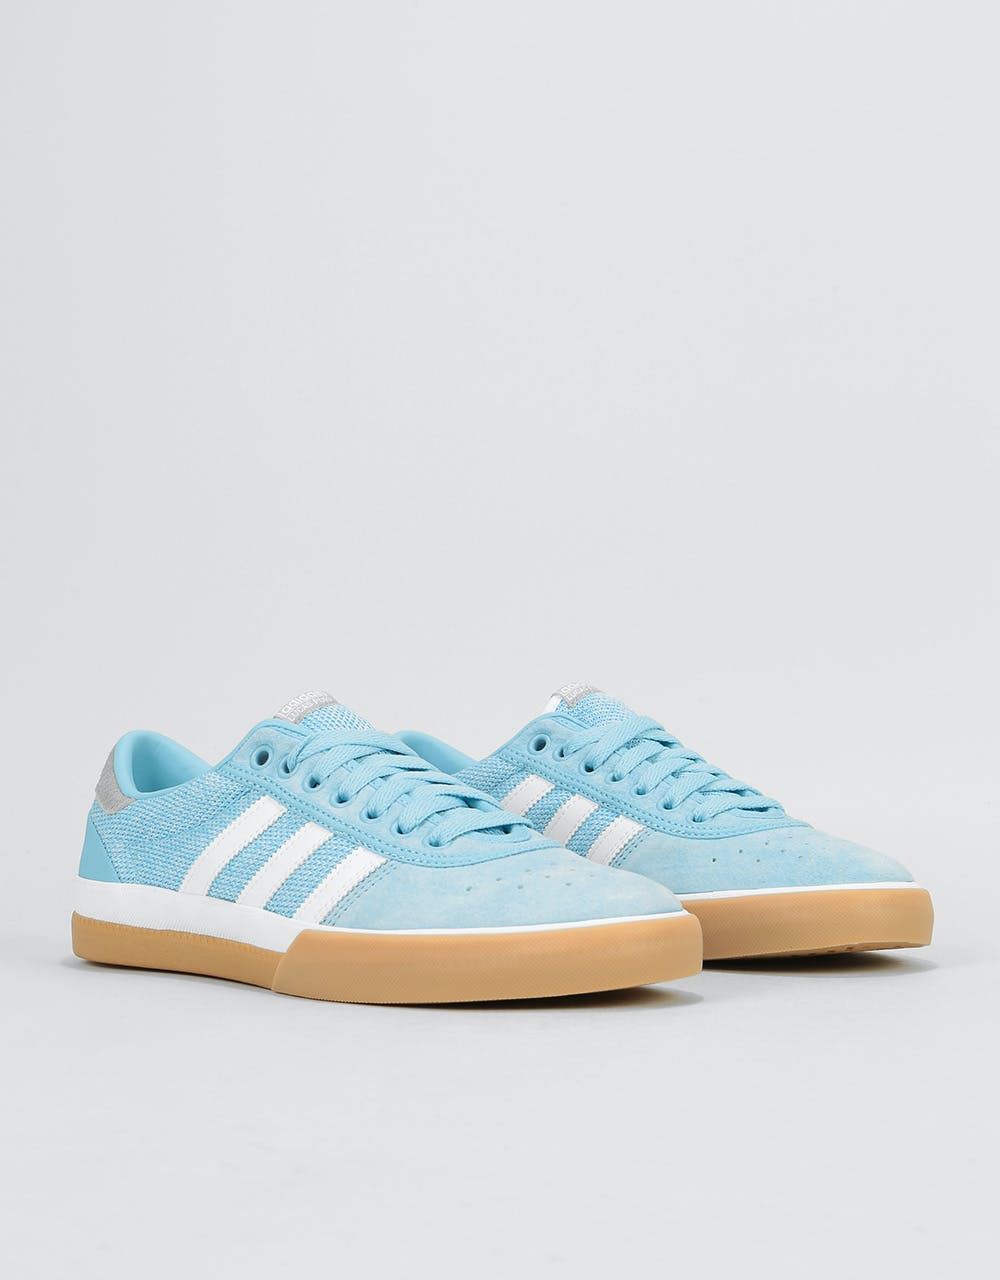 Adidas Lucas Premiere Skate Shoes - Clear Blue/White/Solid Grey